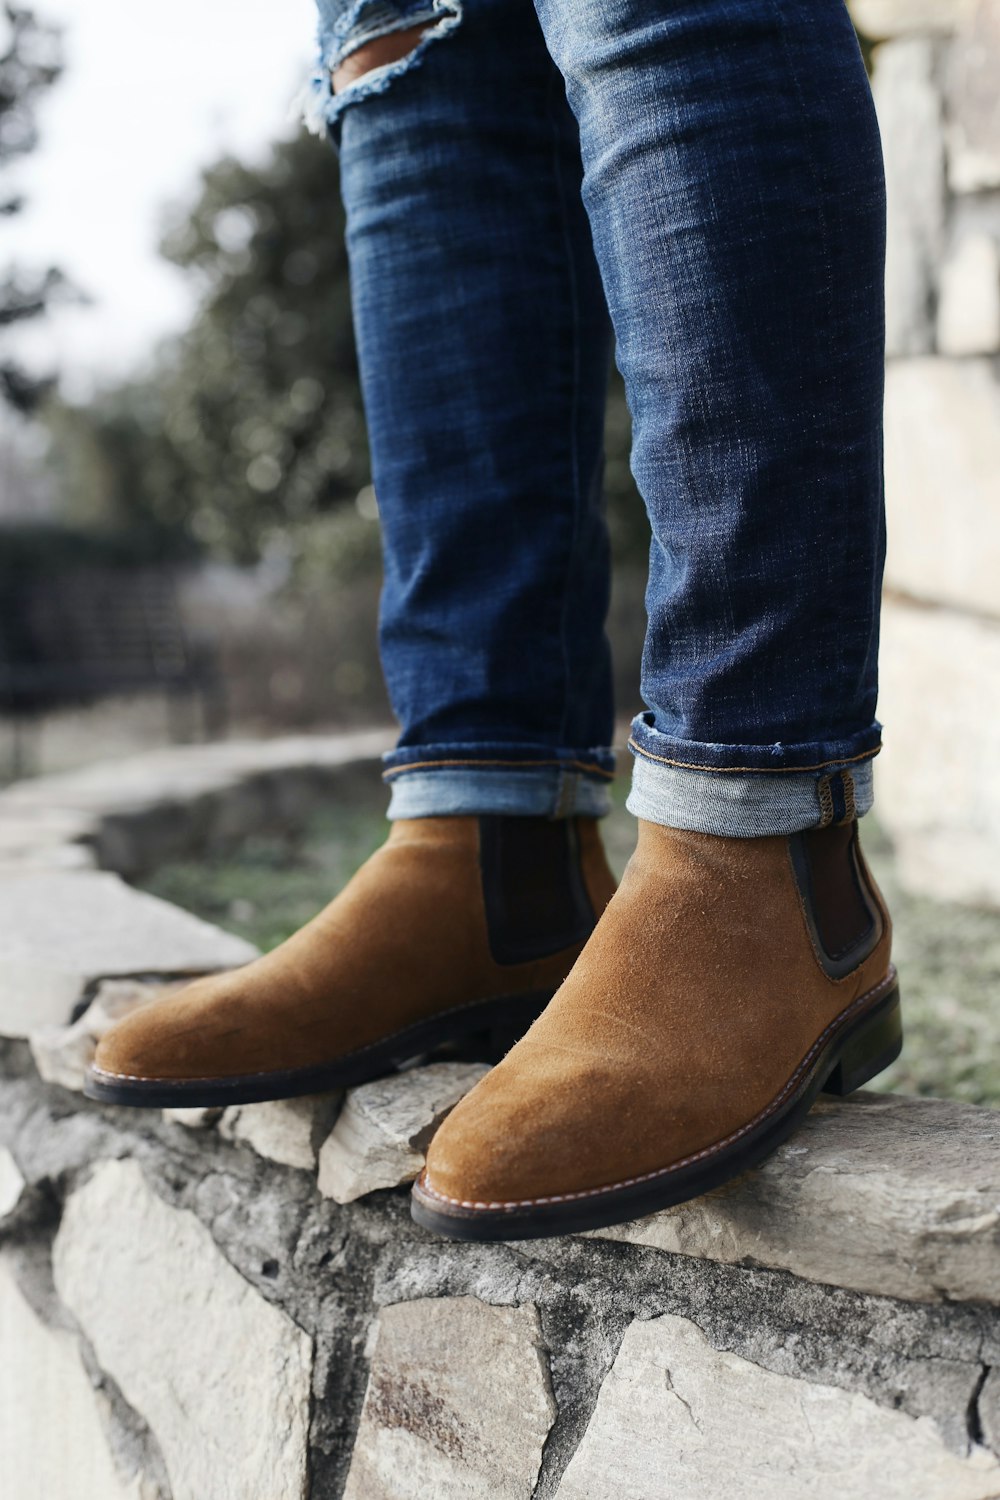 national erklære fax Person wearing pair of brown Chelsea boots photo – Free Clothing Image on  Unsplash